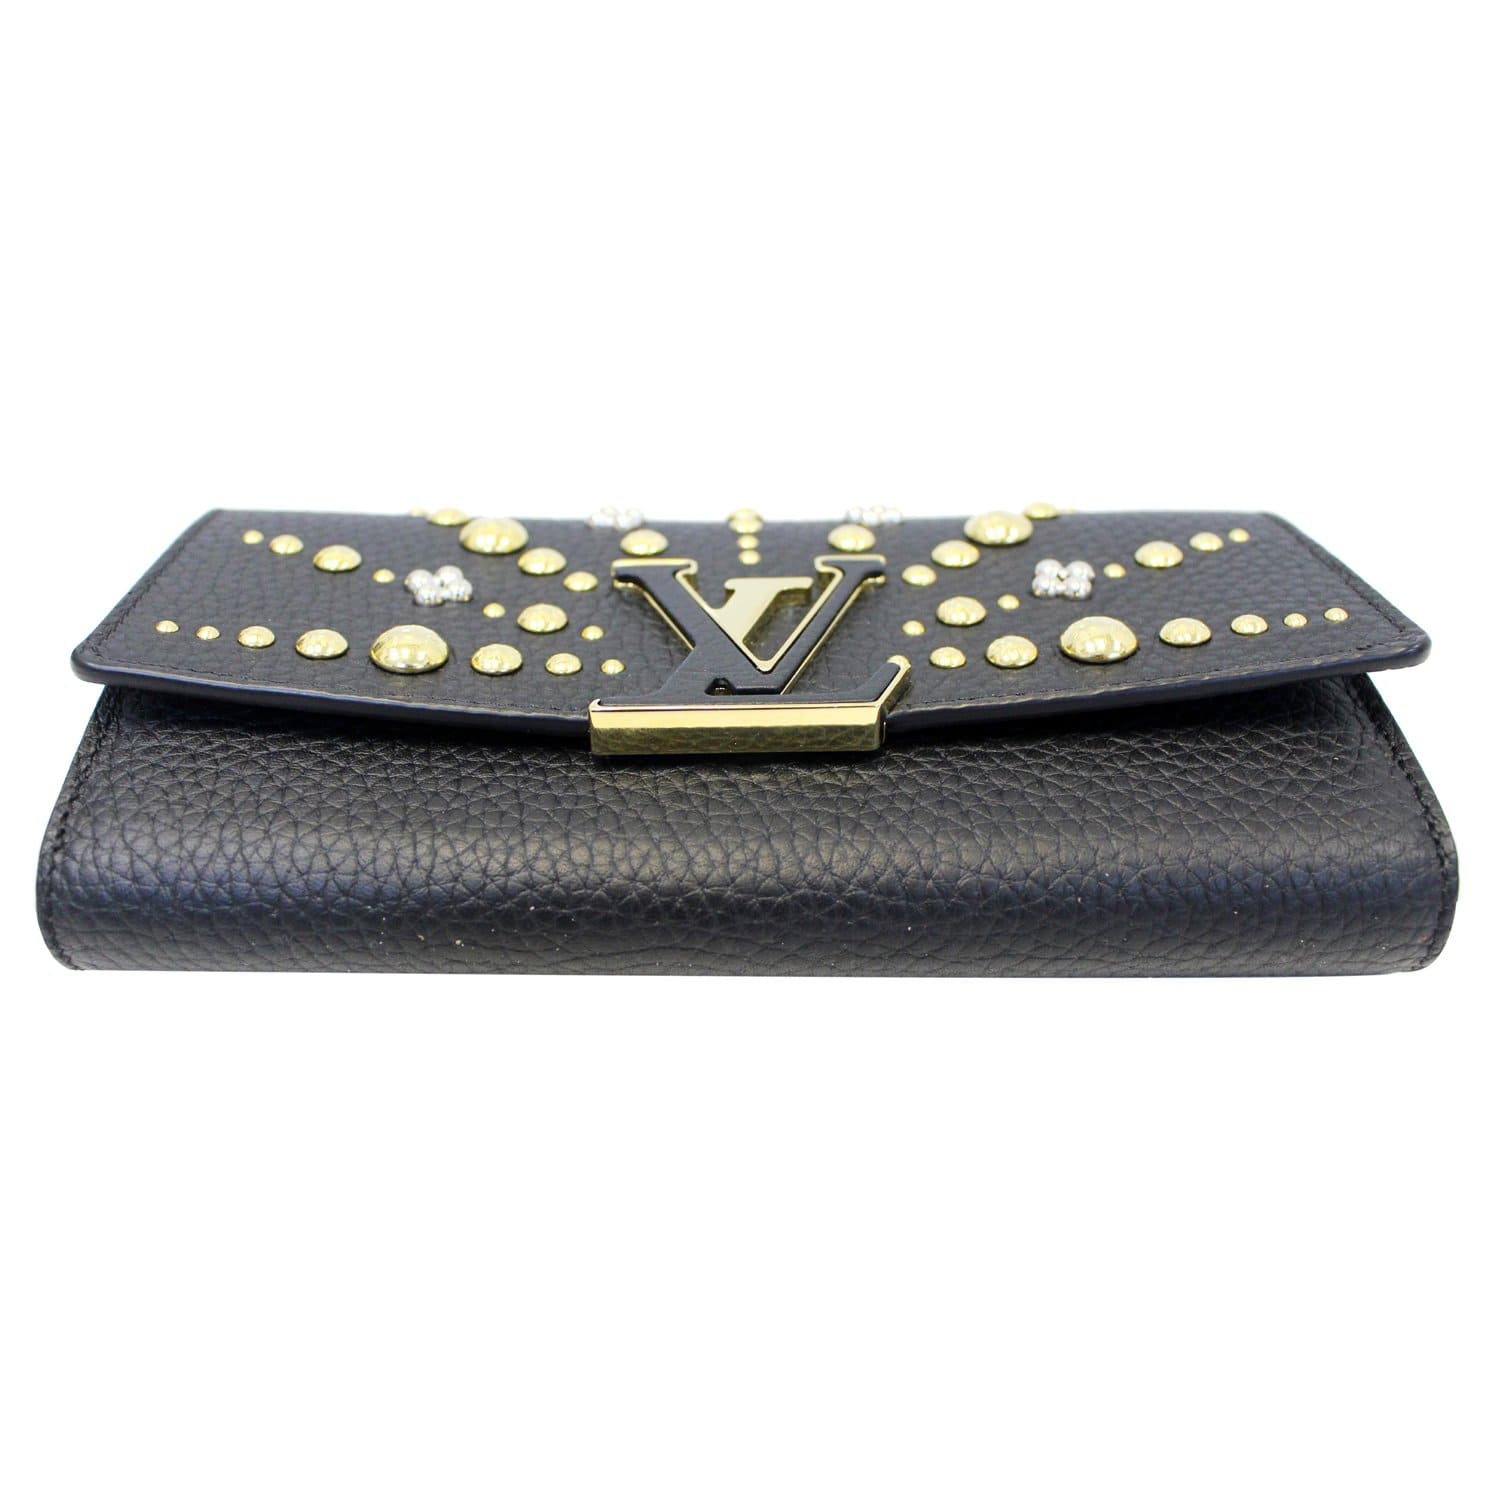 LOUIS VUITTON CAPUCINES WALLET IN BLACK AND PINK TAURILLON LEATHER